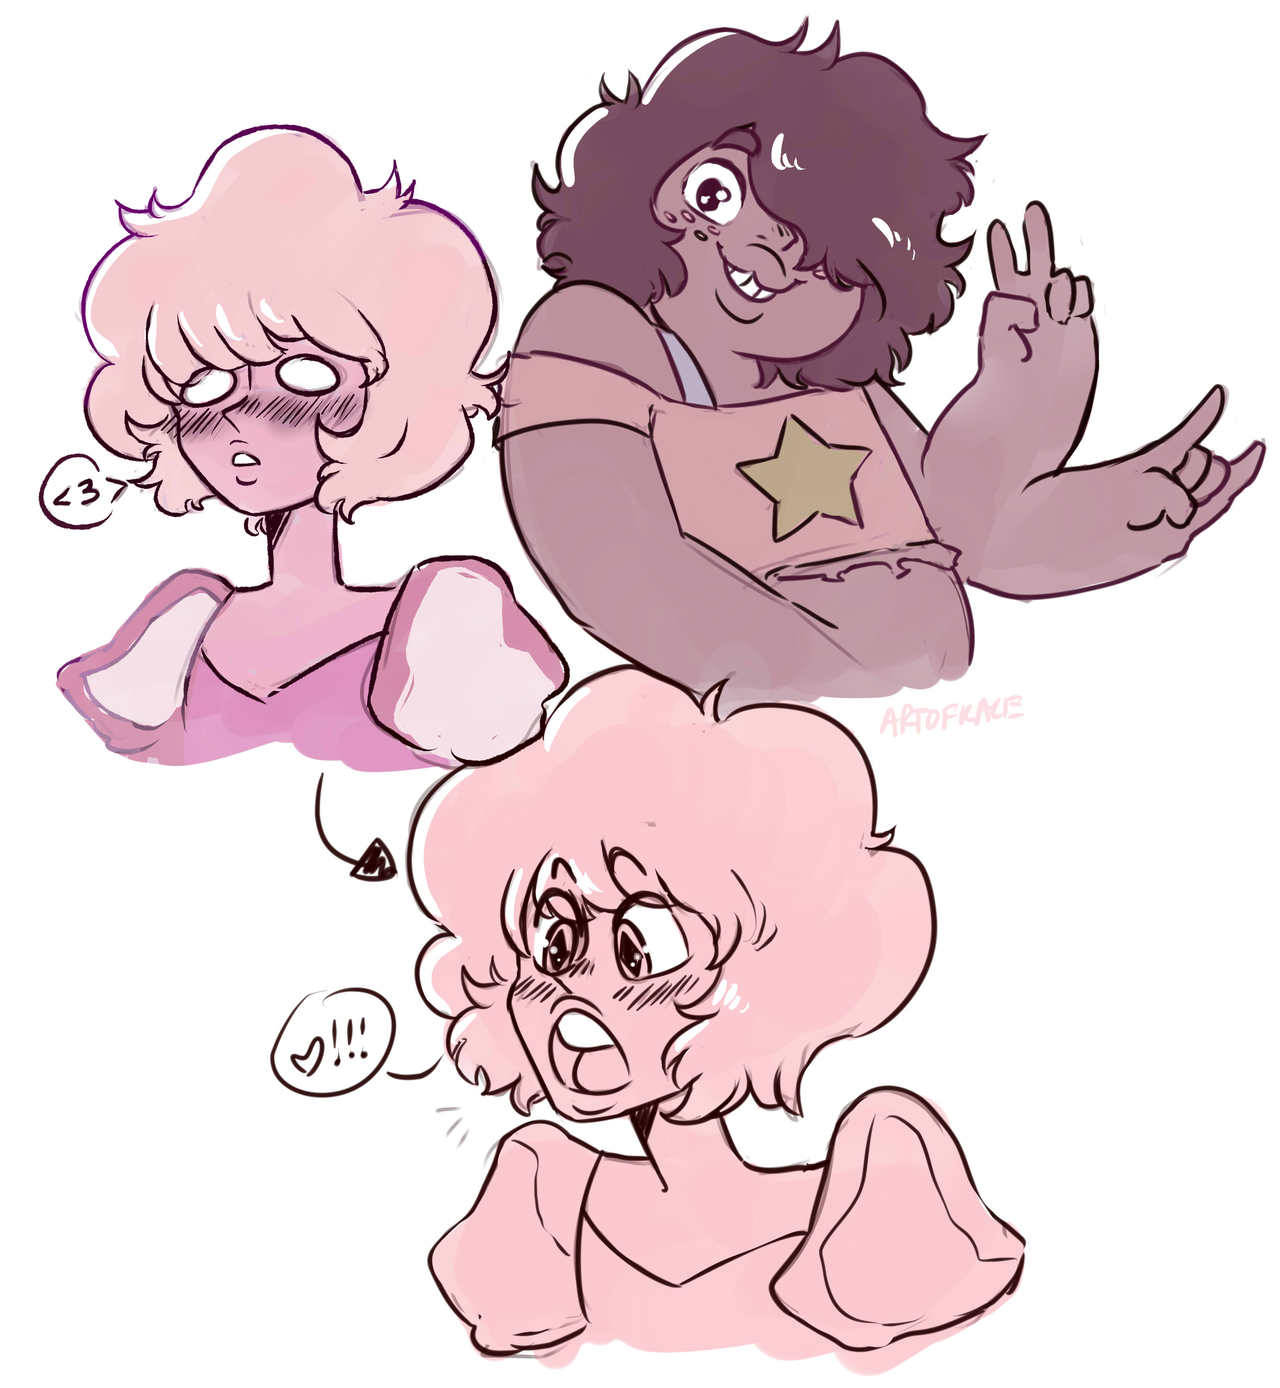 SU expressions! PD and SQ c: